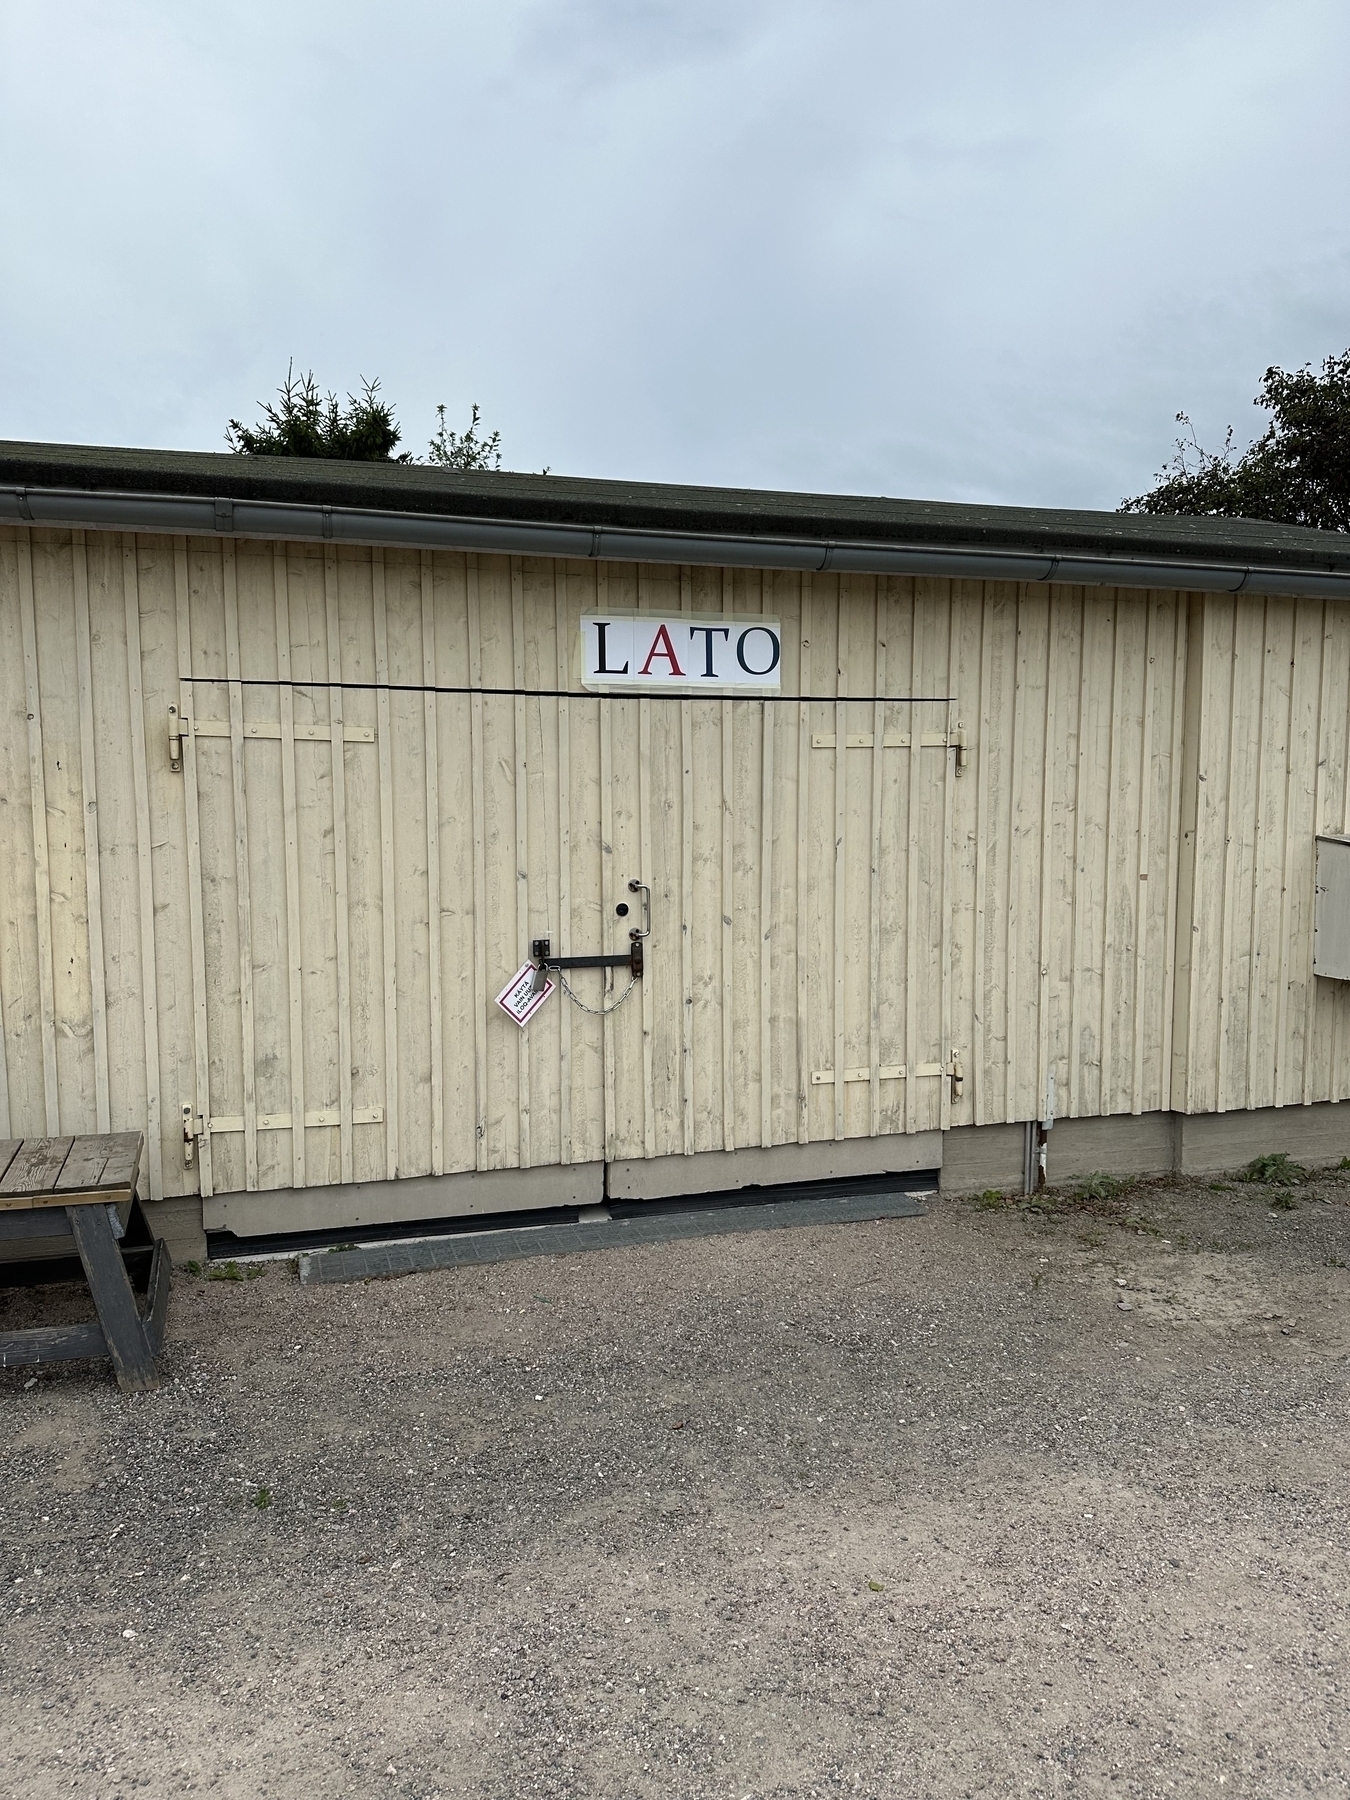 ”Lato” writtten in a serif font over a barn door. ”Lato” is a barn in Finnish, ”summer” in Polish and a popular sans-serif font